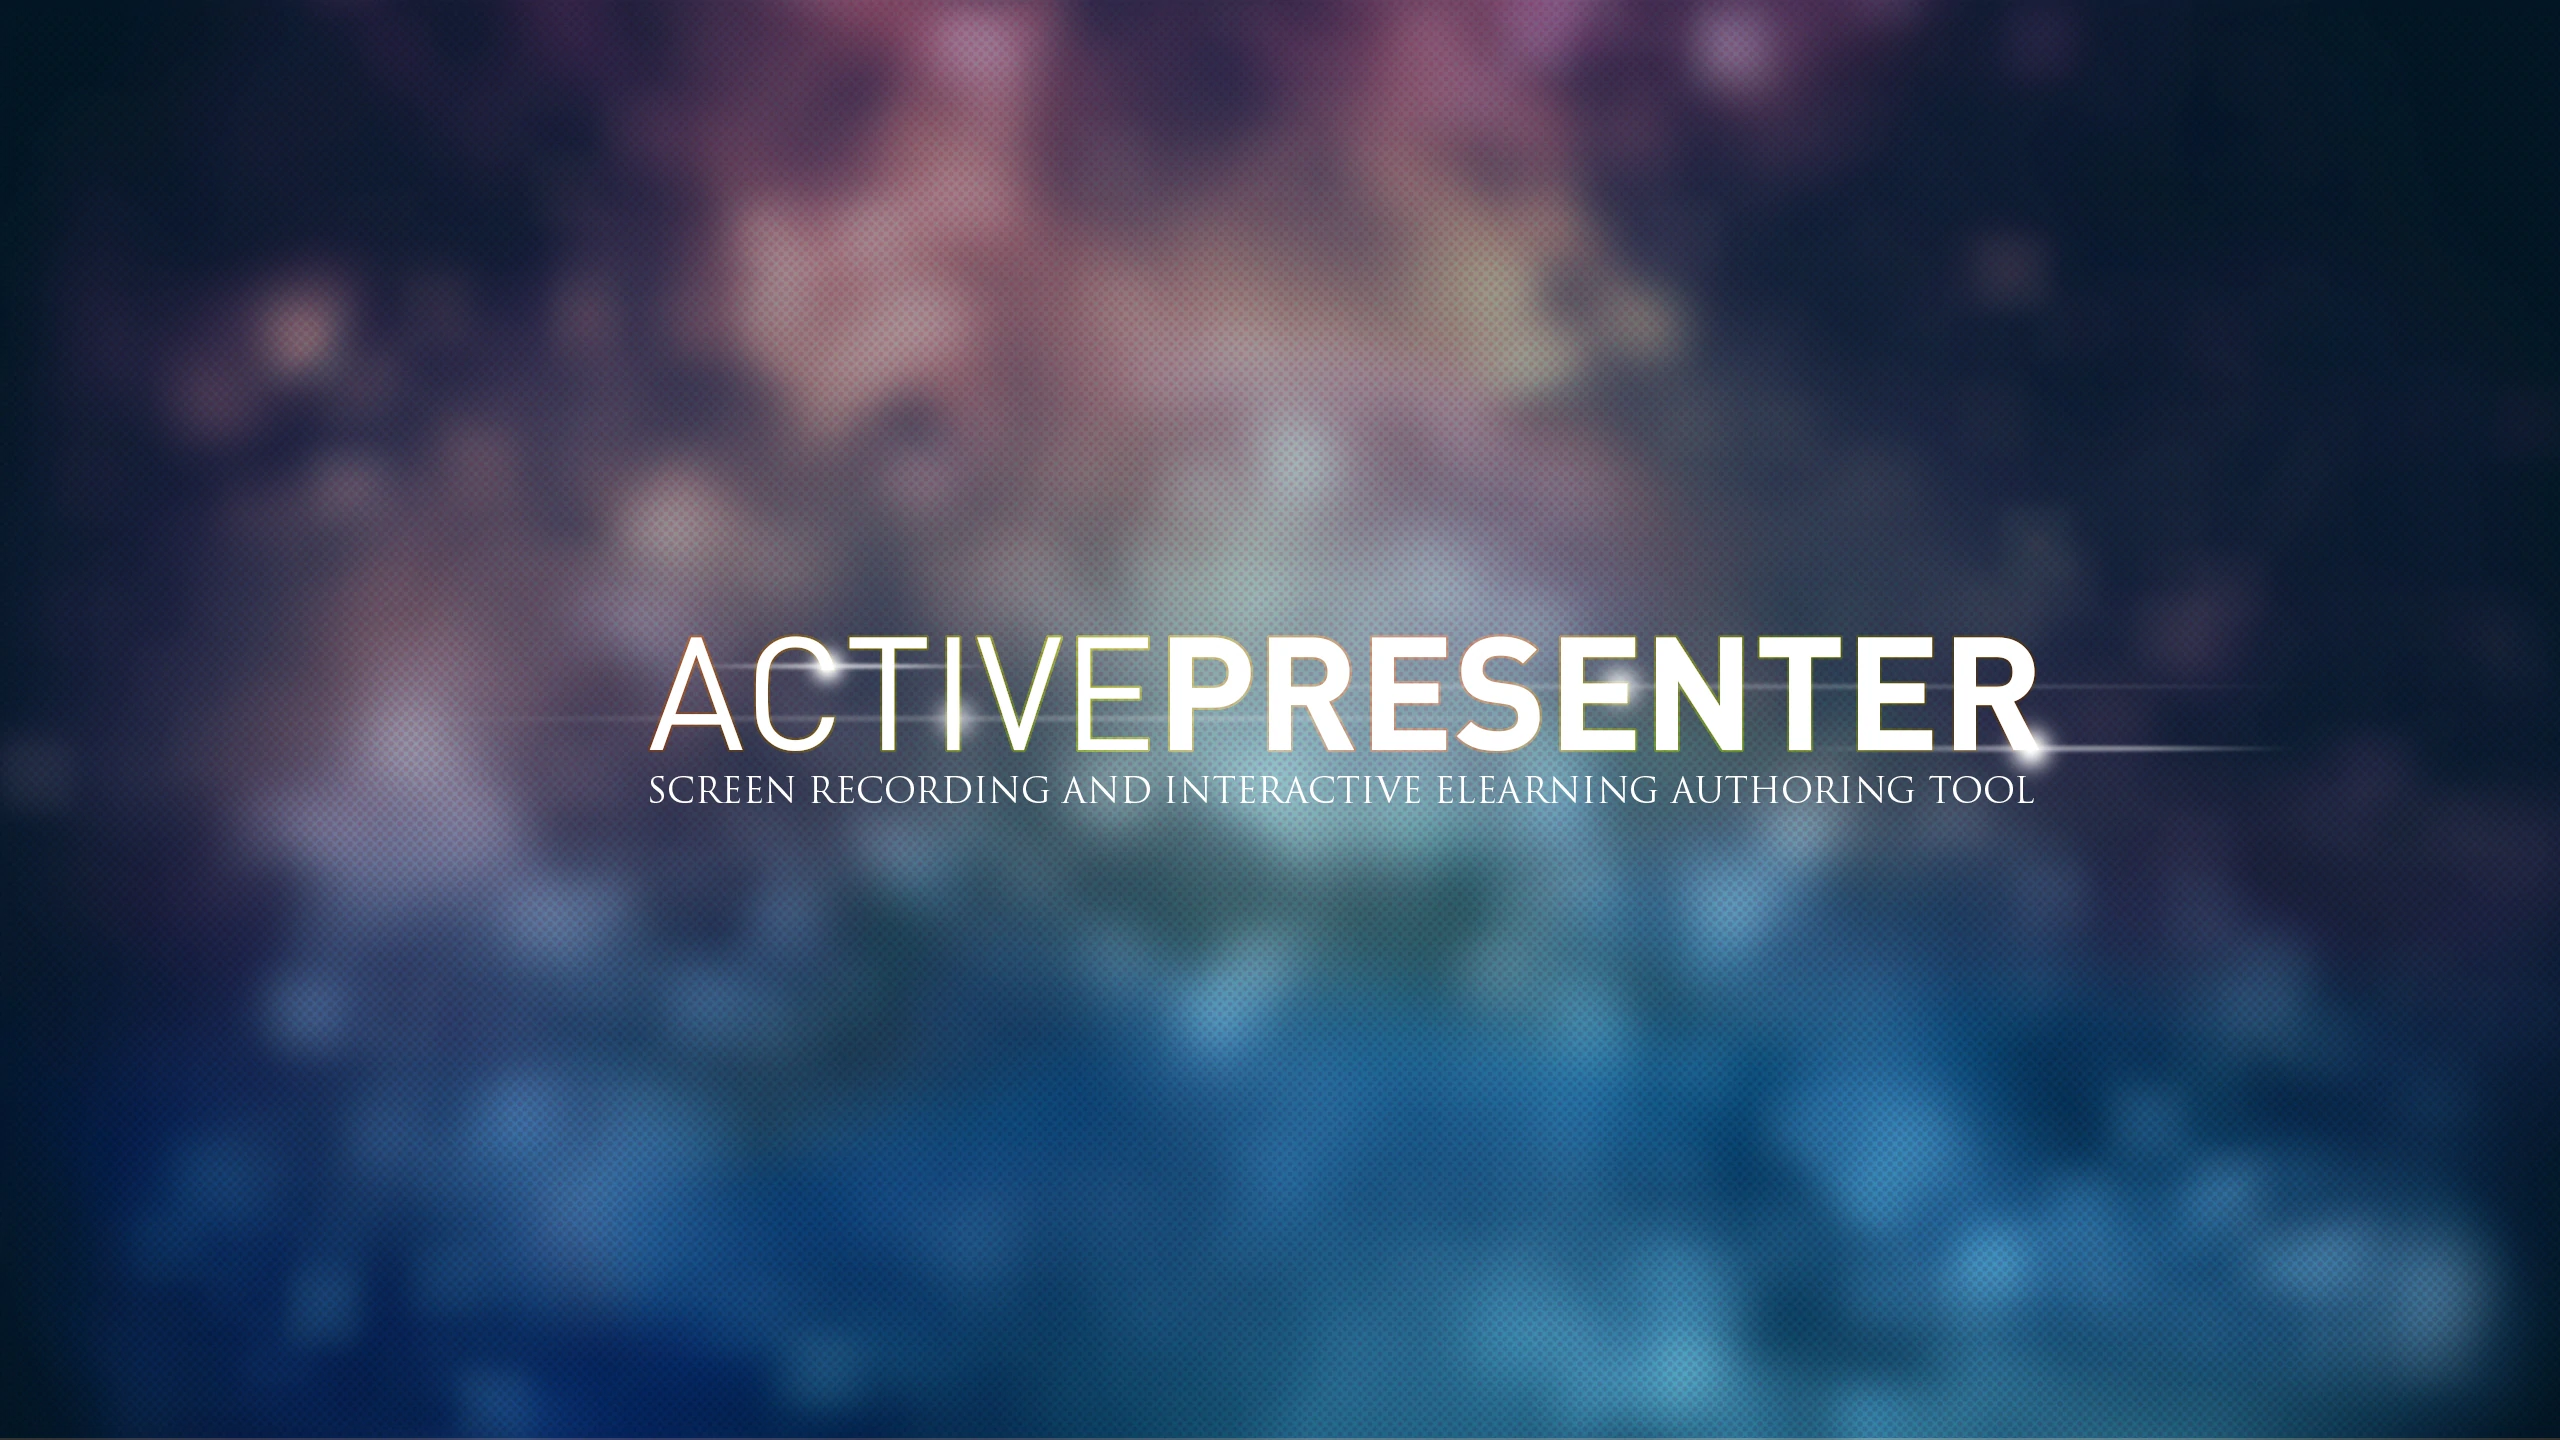 Now, you’ve had a handy software to create an amazing eLearning course content: ActivePresenter.